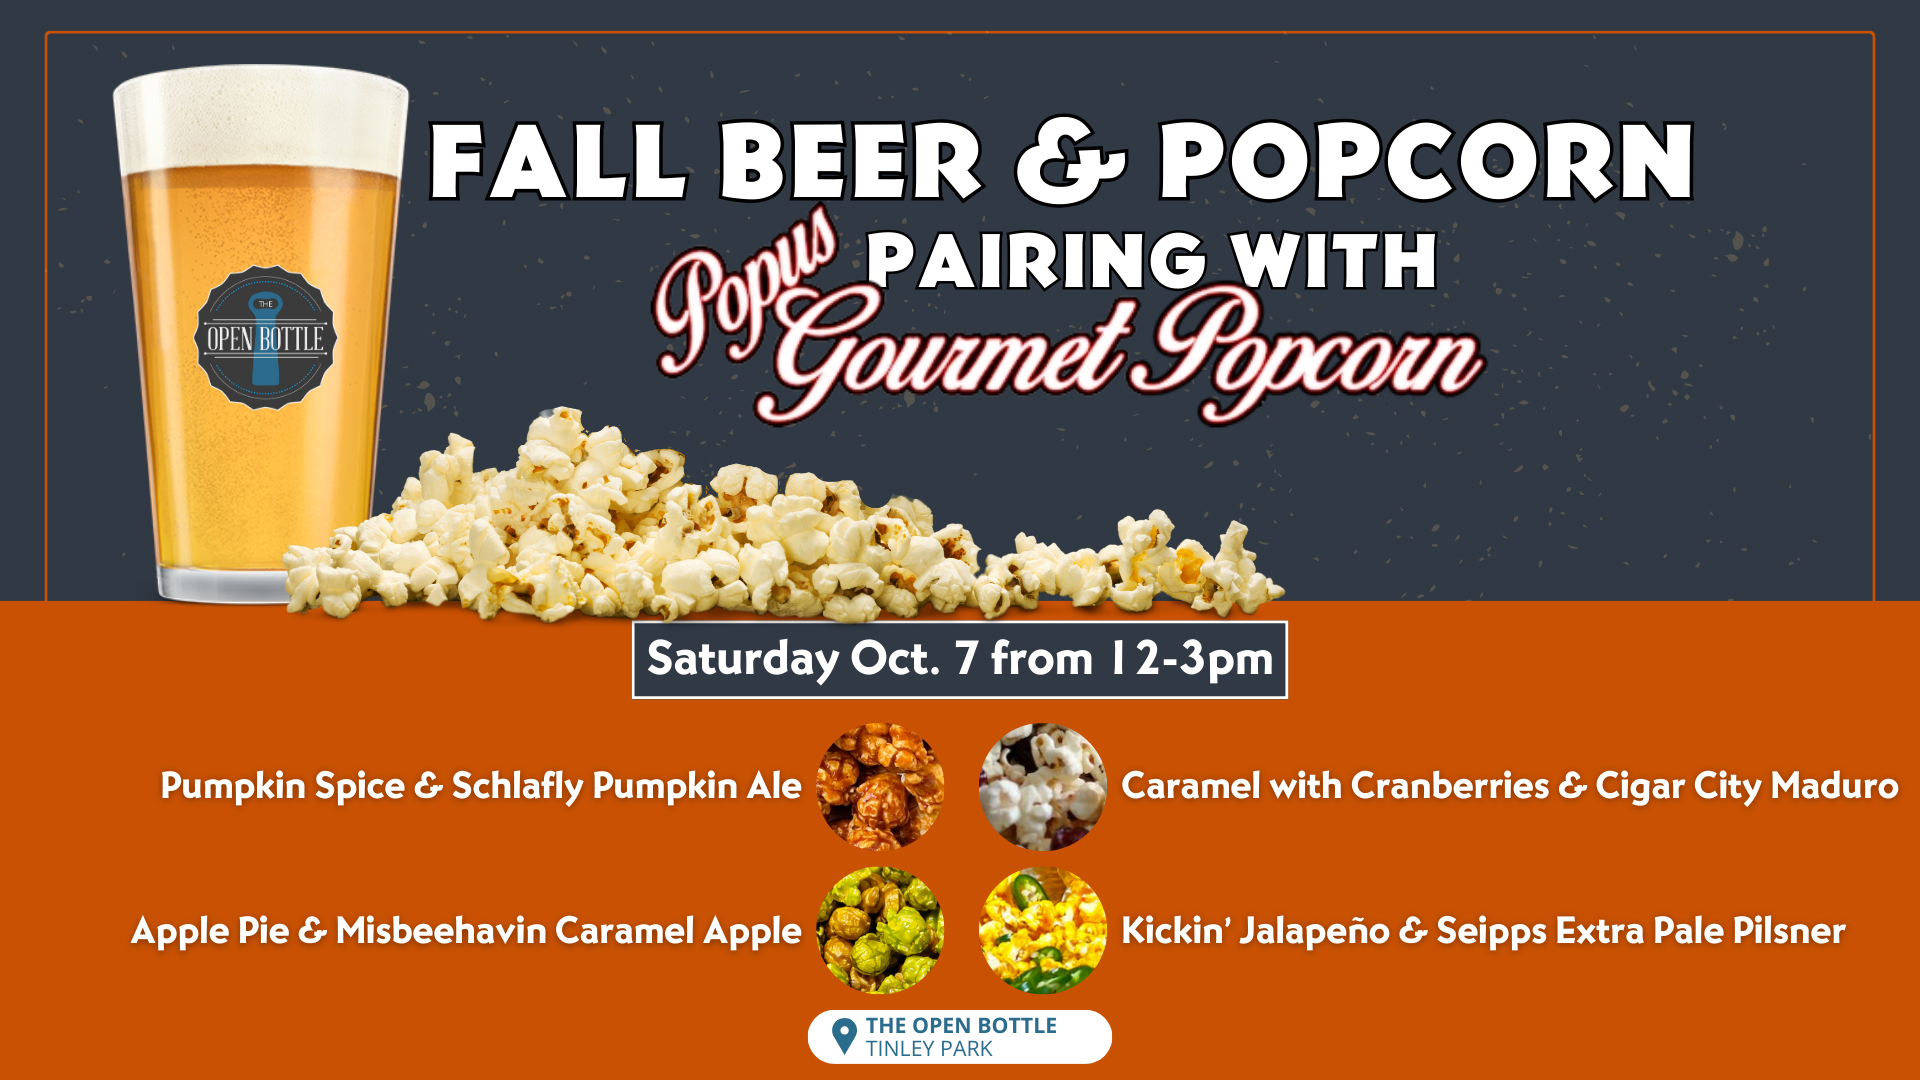 Event: Fall Beer & Popcorn Pairing